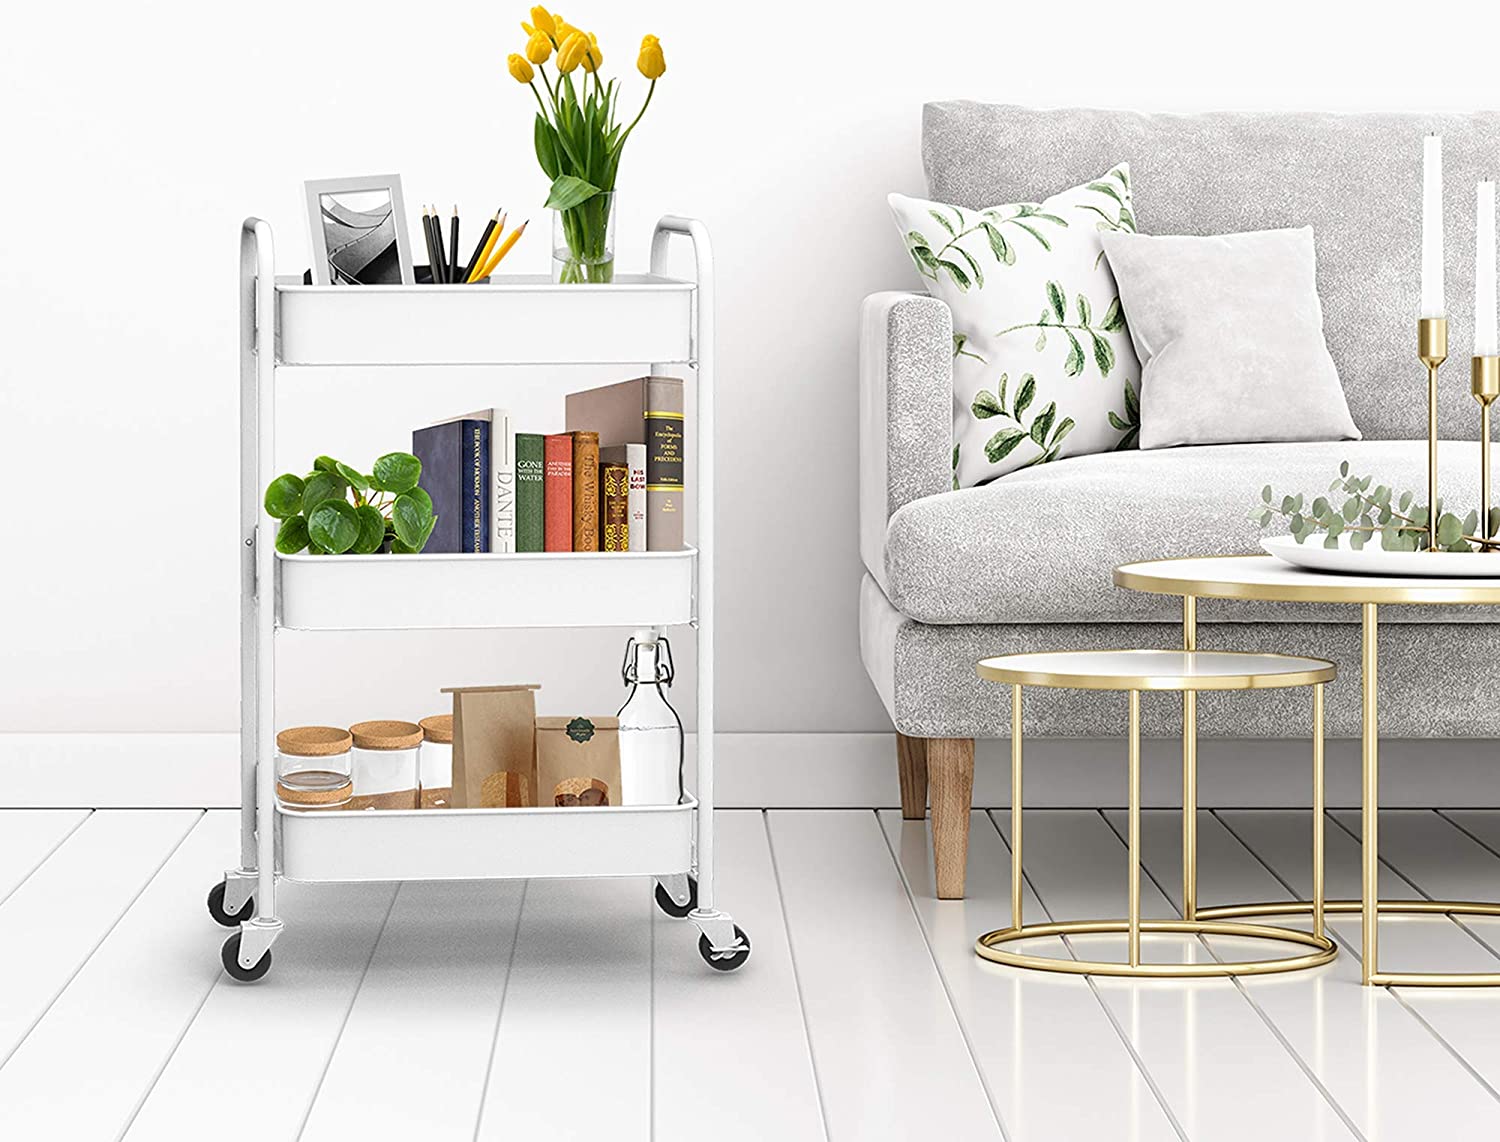 MLMLH 3-Tier Rolling Metal Storage Organizer - Mobile Utility Cart Kitchen Cart with Caster Wheels， White